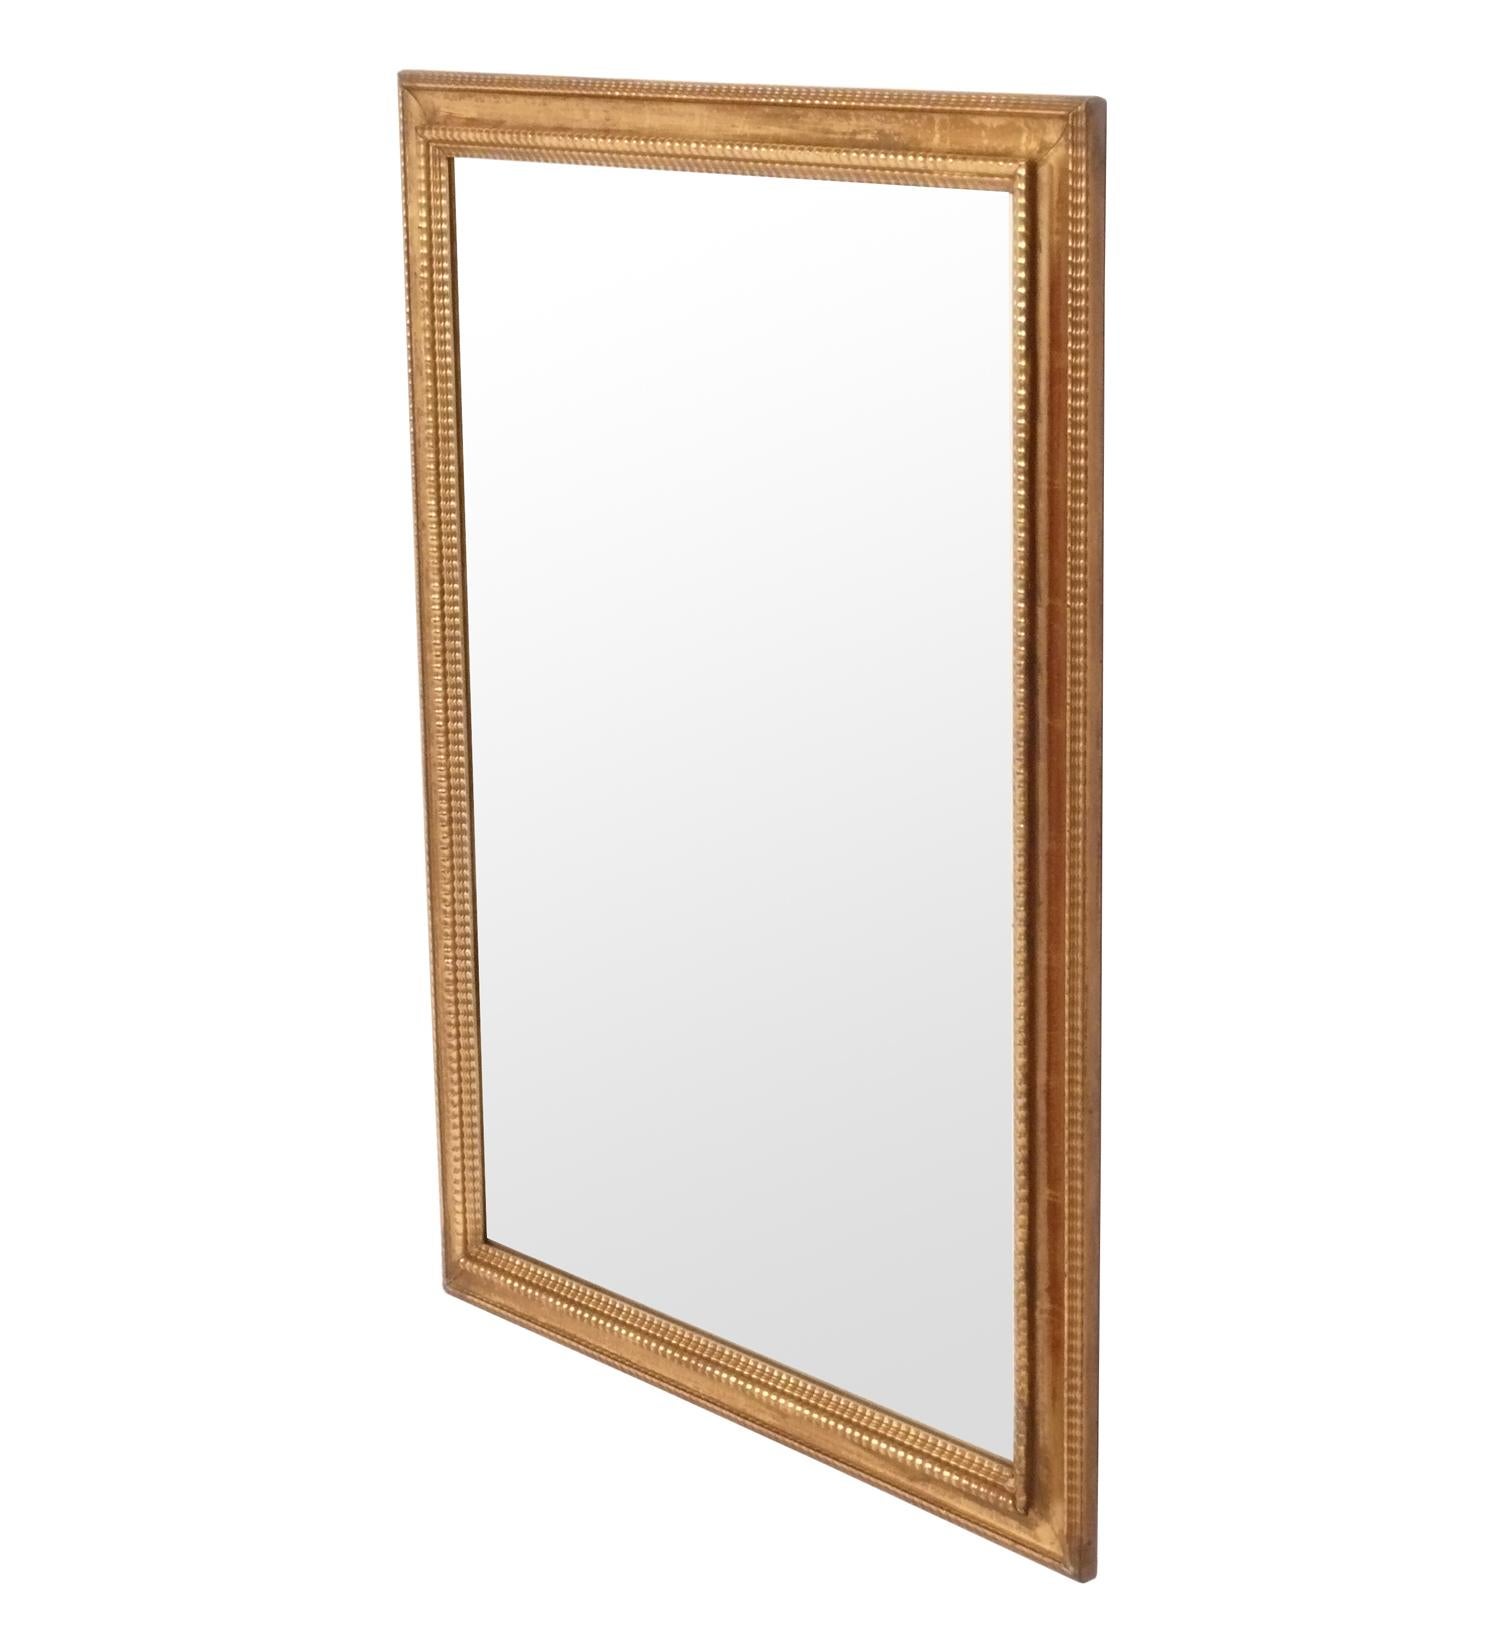 Gilt Italian mirror, recently removed from the famed Carlyle Hotel in NYC, originally from Italy, circa 1960s. It retains its original warm patina to both the gilt wood frame and the original mirror. Very good original condition with distressed